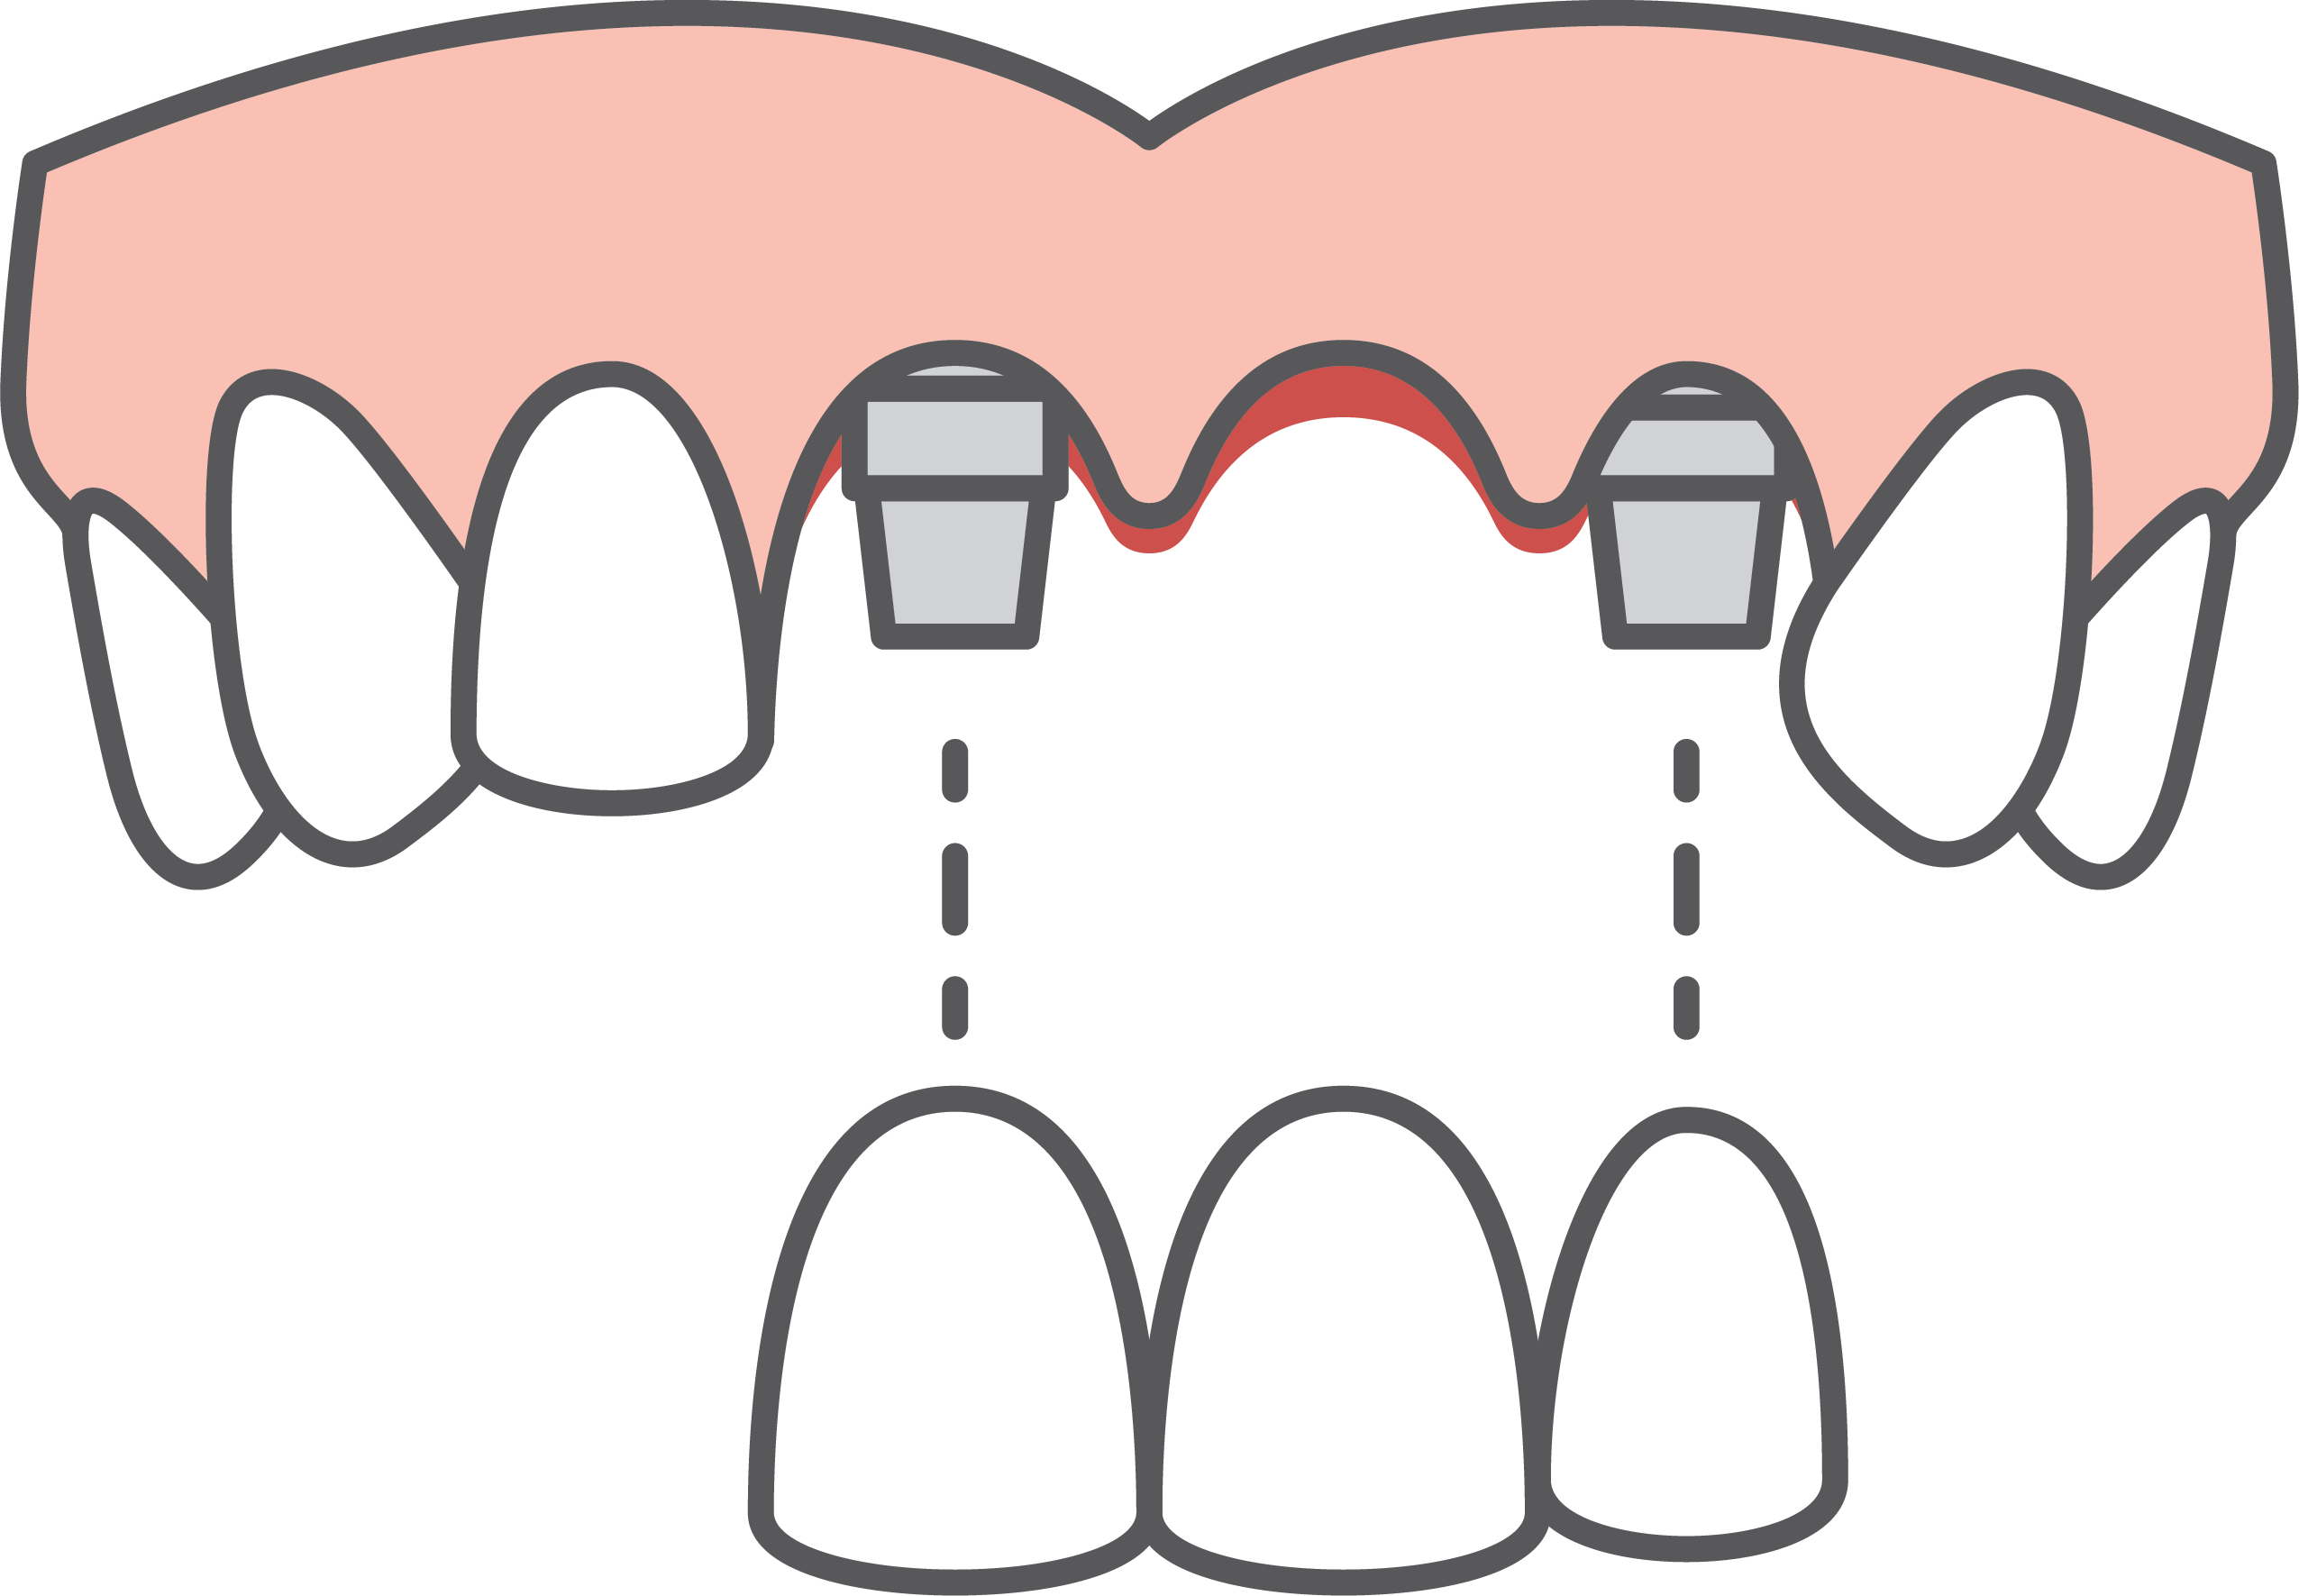 Fig 2. A bridge, supported by dental implants, replaces multiple teeth.